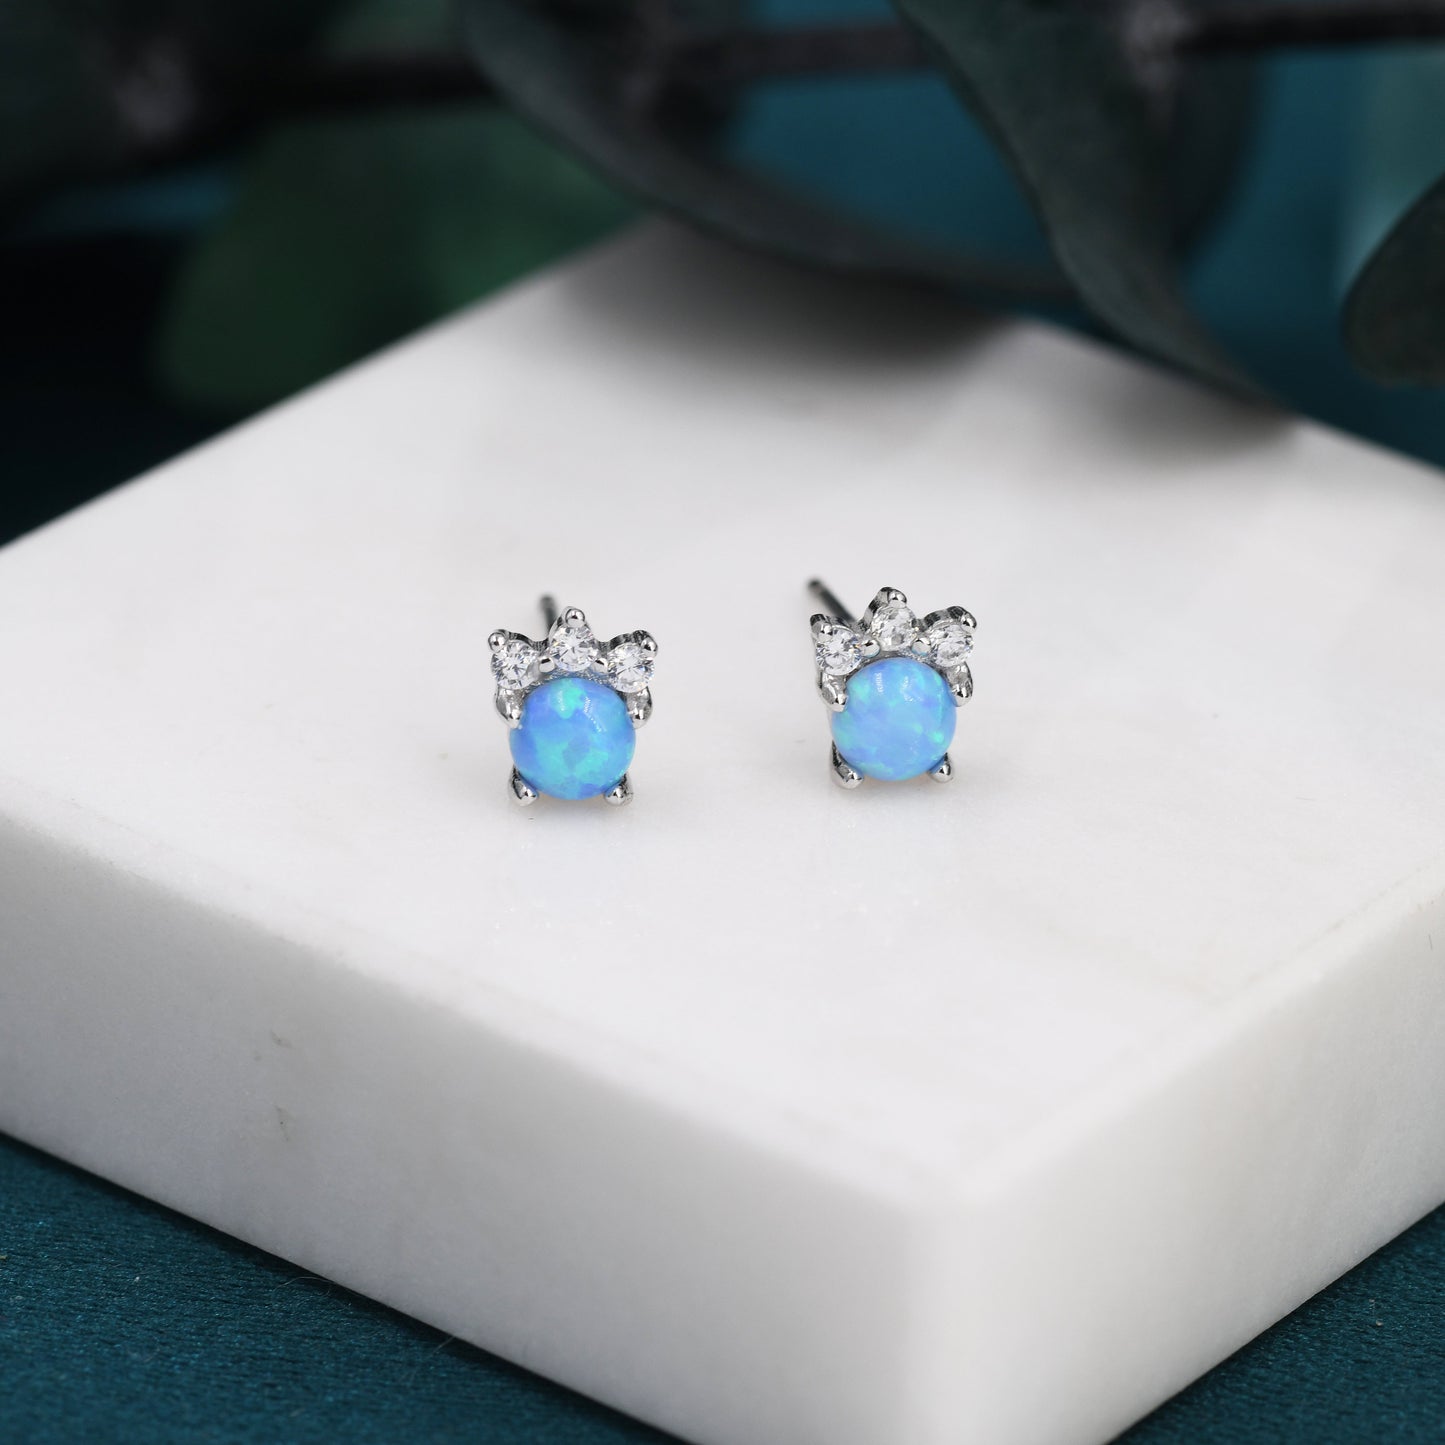 Tiny Blue Opal with CZ Stud Earrings in Sterling Silver, Silver or Gold, Vintage Inspired Design, Opal Crown Earrings Crown Stud